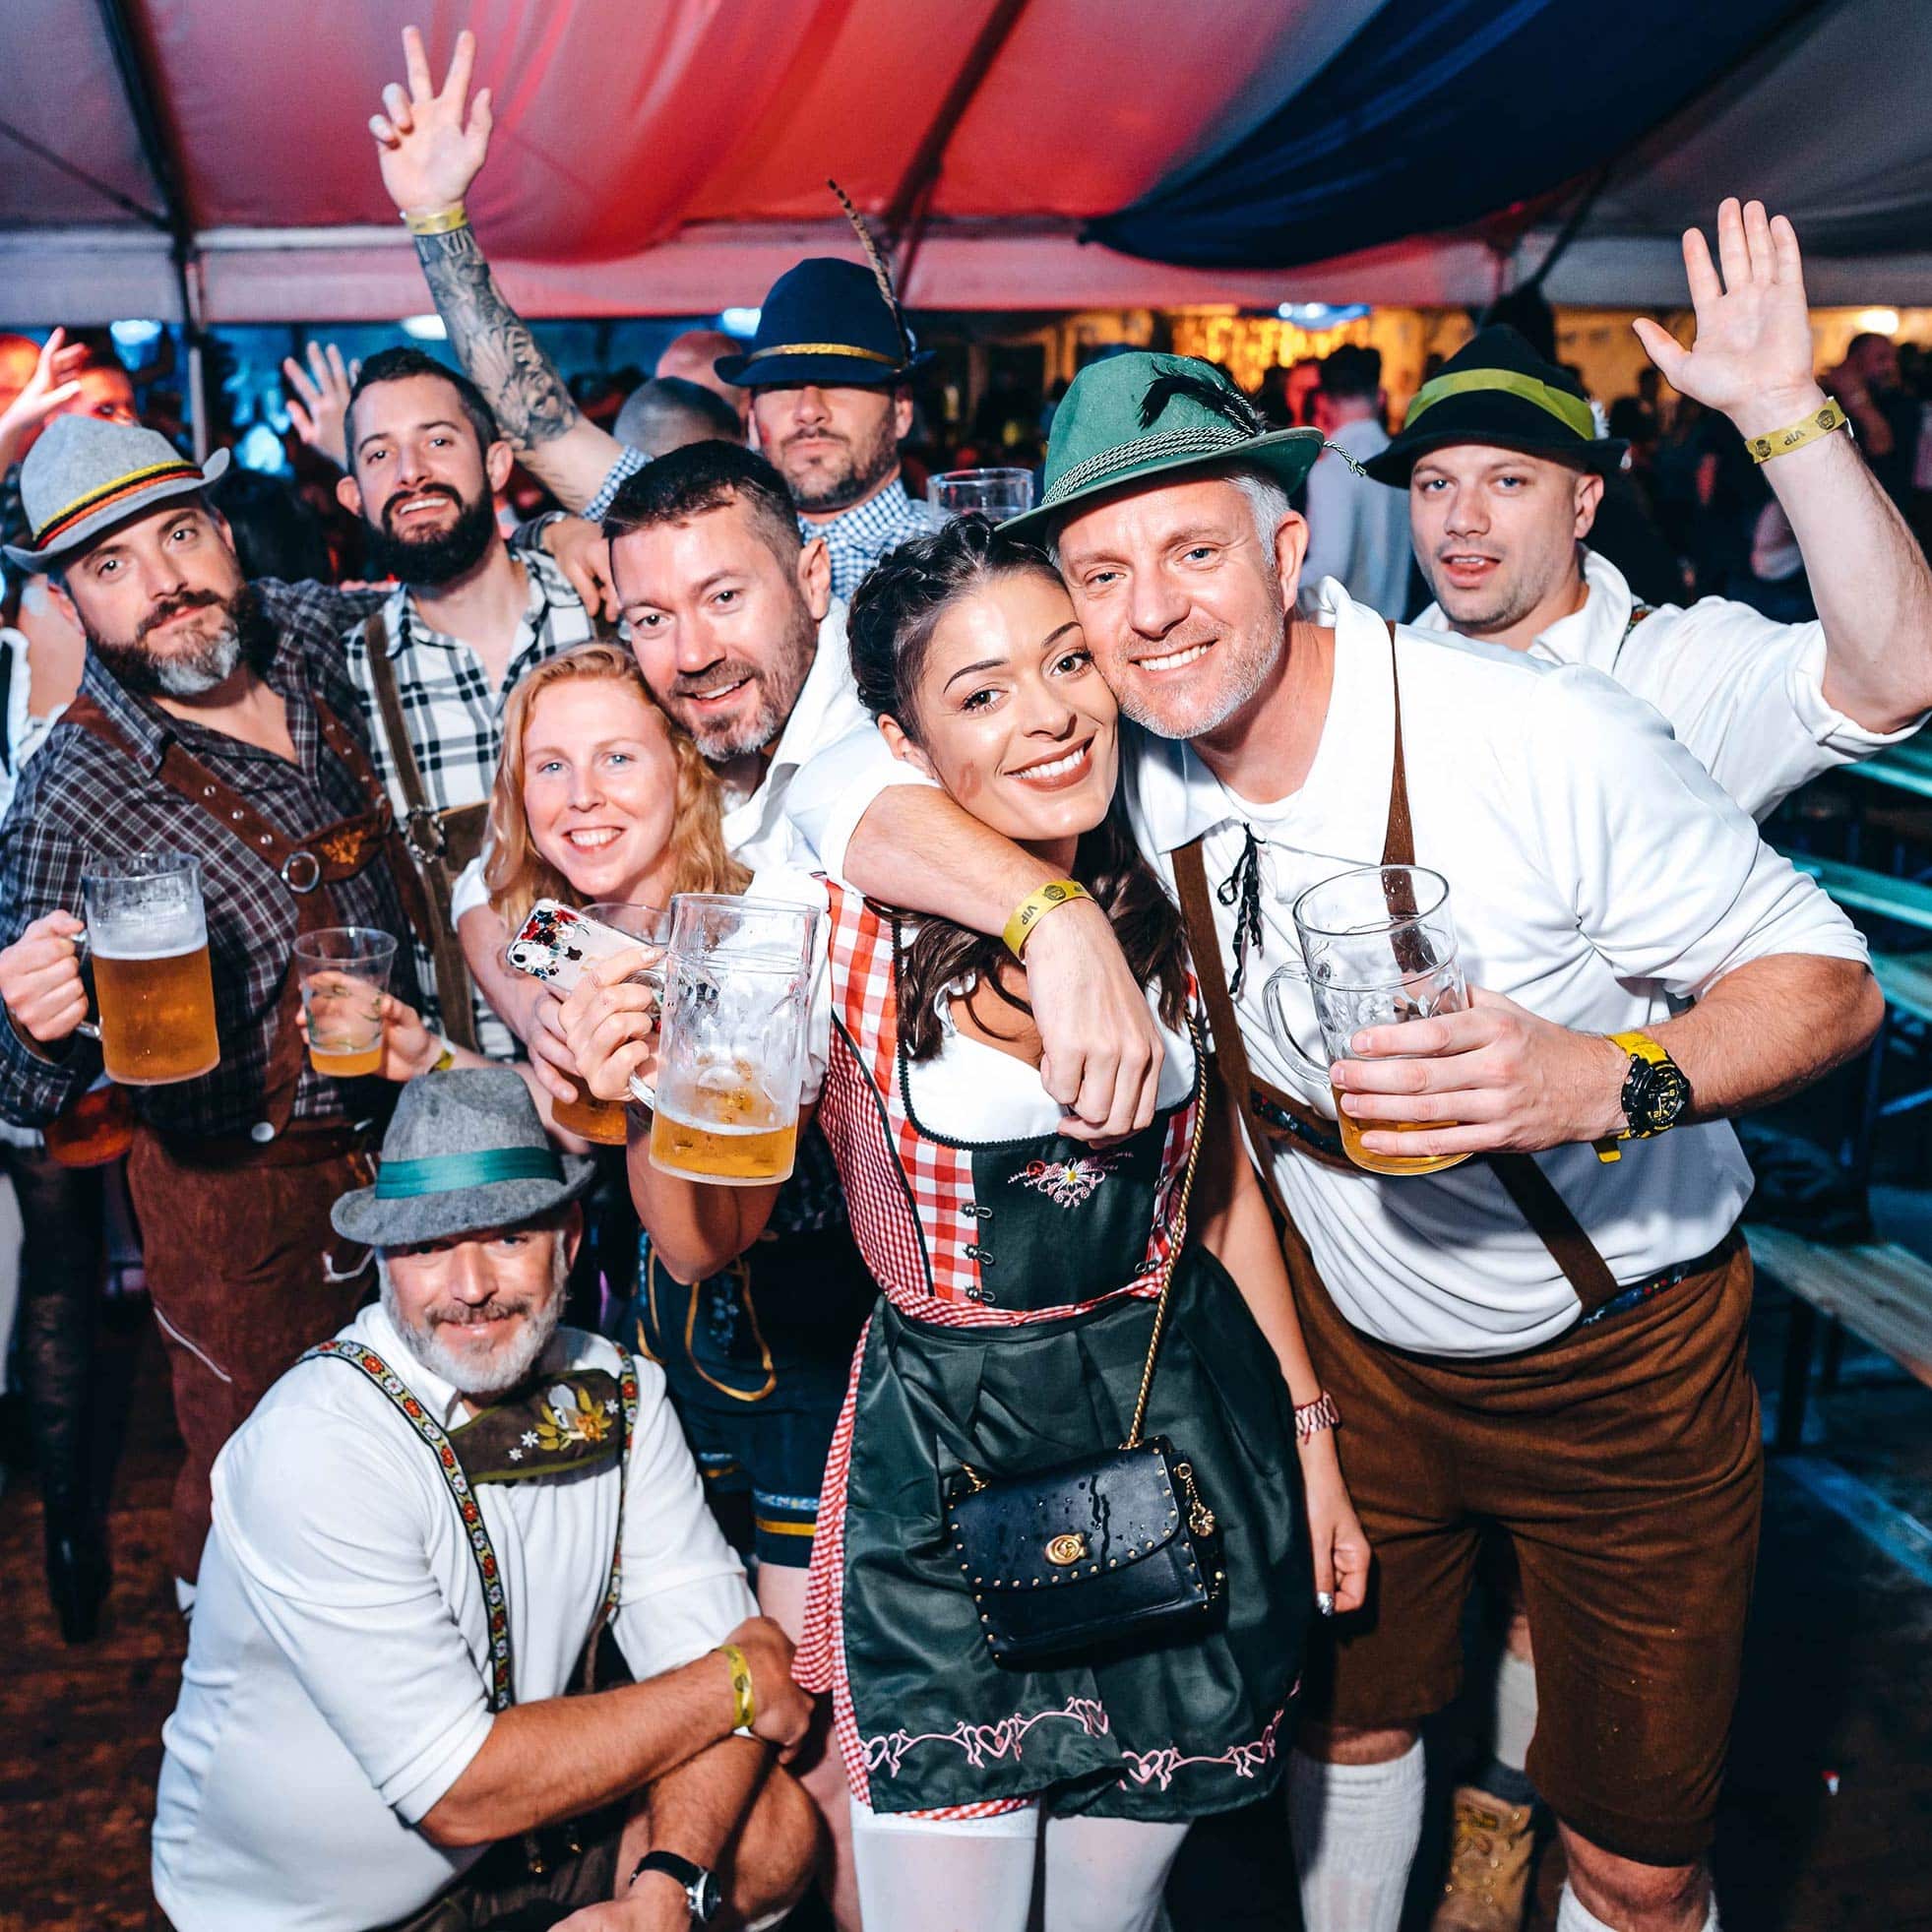 A group of people in lederhosen holding beers and celebrating Oktoberfest